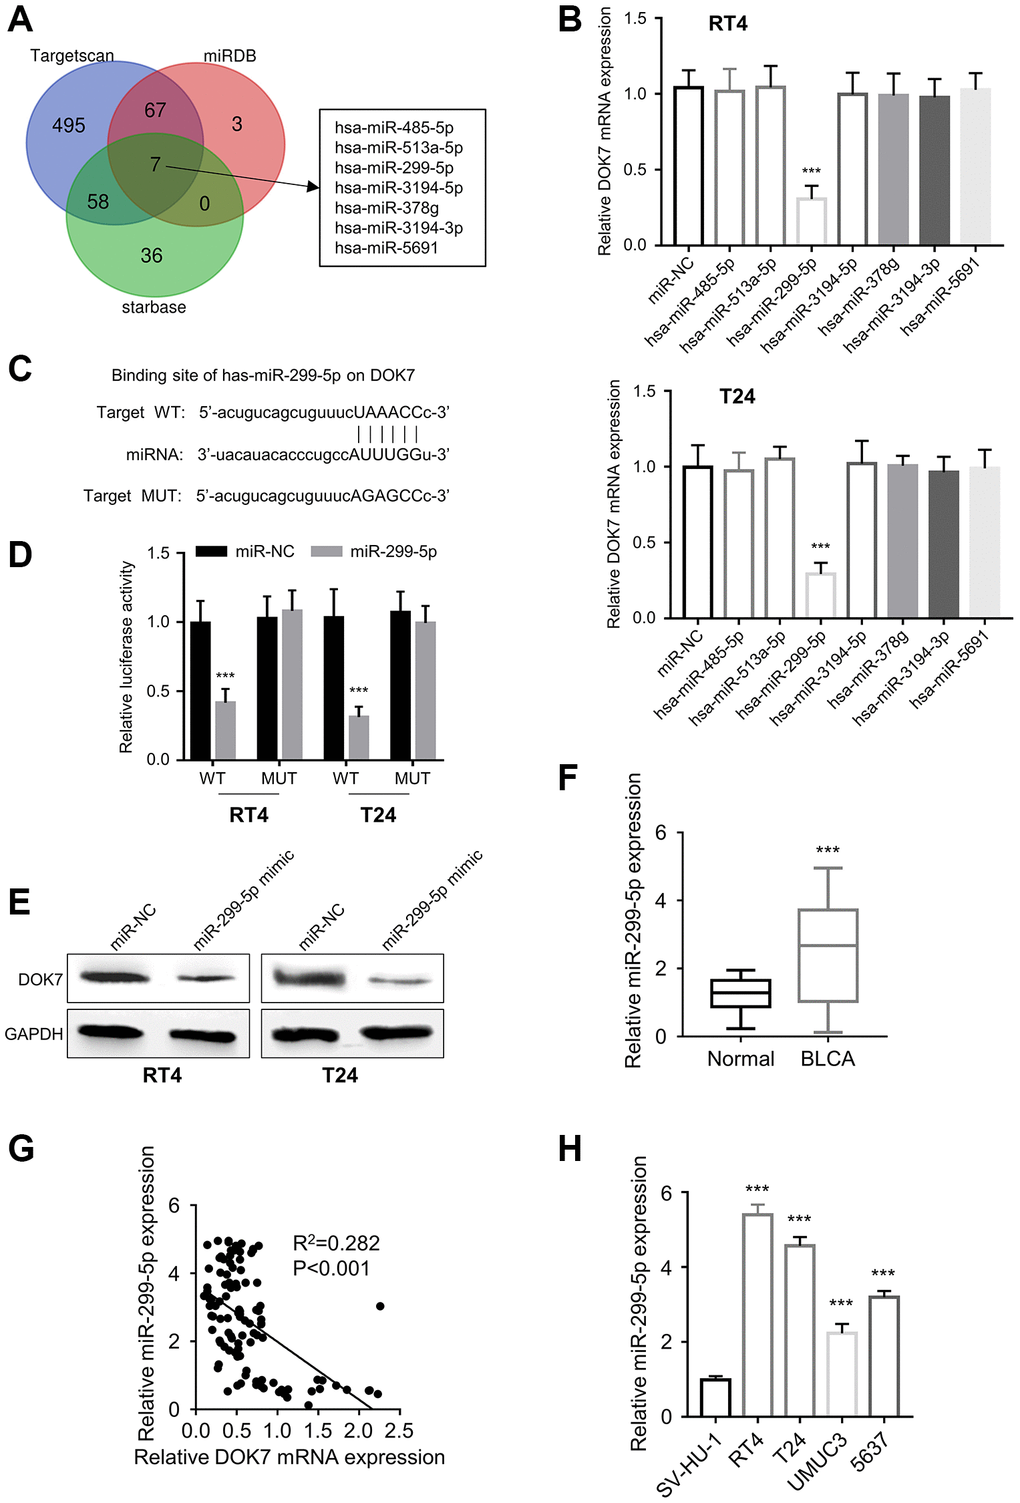 miR-299-5p targets DOK7. (A) DOK7-targeting miRNA candidates predicted by “starbase”, “Targetscan” and “miRDB” databases; (B) RT-qPCR analysis of DOK7 mRNA levels after the transfection of miR-NC or the miRNA mimics of hsa-miR-485-5p, hsa-miR-513a-5p, hsa-miR-299-5p, hsa-miR-3194-5p, hsa-miR-378g, hsa-miR-3194-3p and hsa-miR-5691; (C) The predicted binding site of miR-299-5p and DOK7 mRNA 3'UTR region by “TargetScan”; (D) Luciferase reporter assay to detect the binding ability of miR-299-5p to wild-type DOK7 and mutant DOK7 luciferase reporter; (E) WB detection of DOK7 protein levels in different groups (miR-NC, miR-299-5p mimic) of T24 and RT4 cell lines; (F) RT-qPCR detection of miR-299-5p expression in 108 pairs of BLCA cancer tissues and adjacent normal tissues; (G) Spearman correlation coefficient analysis of the relationship between DOK7 and miR-299-5p expression levels in BLCA tumor tissues; (H) RT-qPCR detection of miR-299-5p expression levels in BLCA cell lines and normal bladder cell line. ***P 